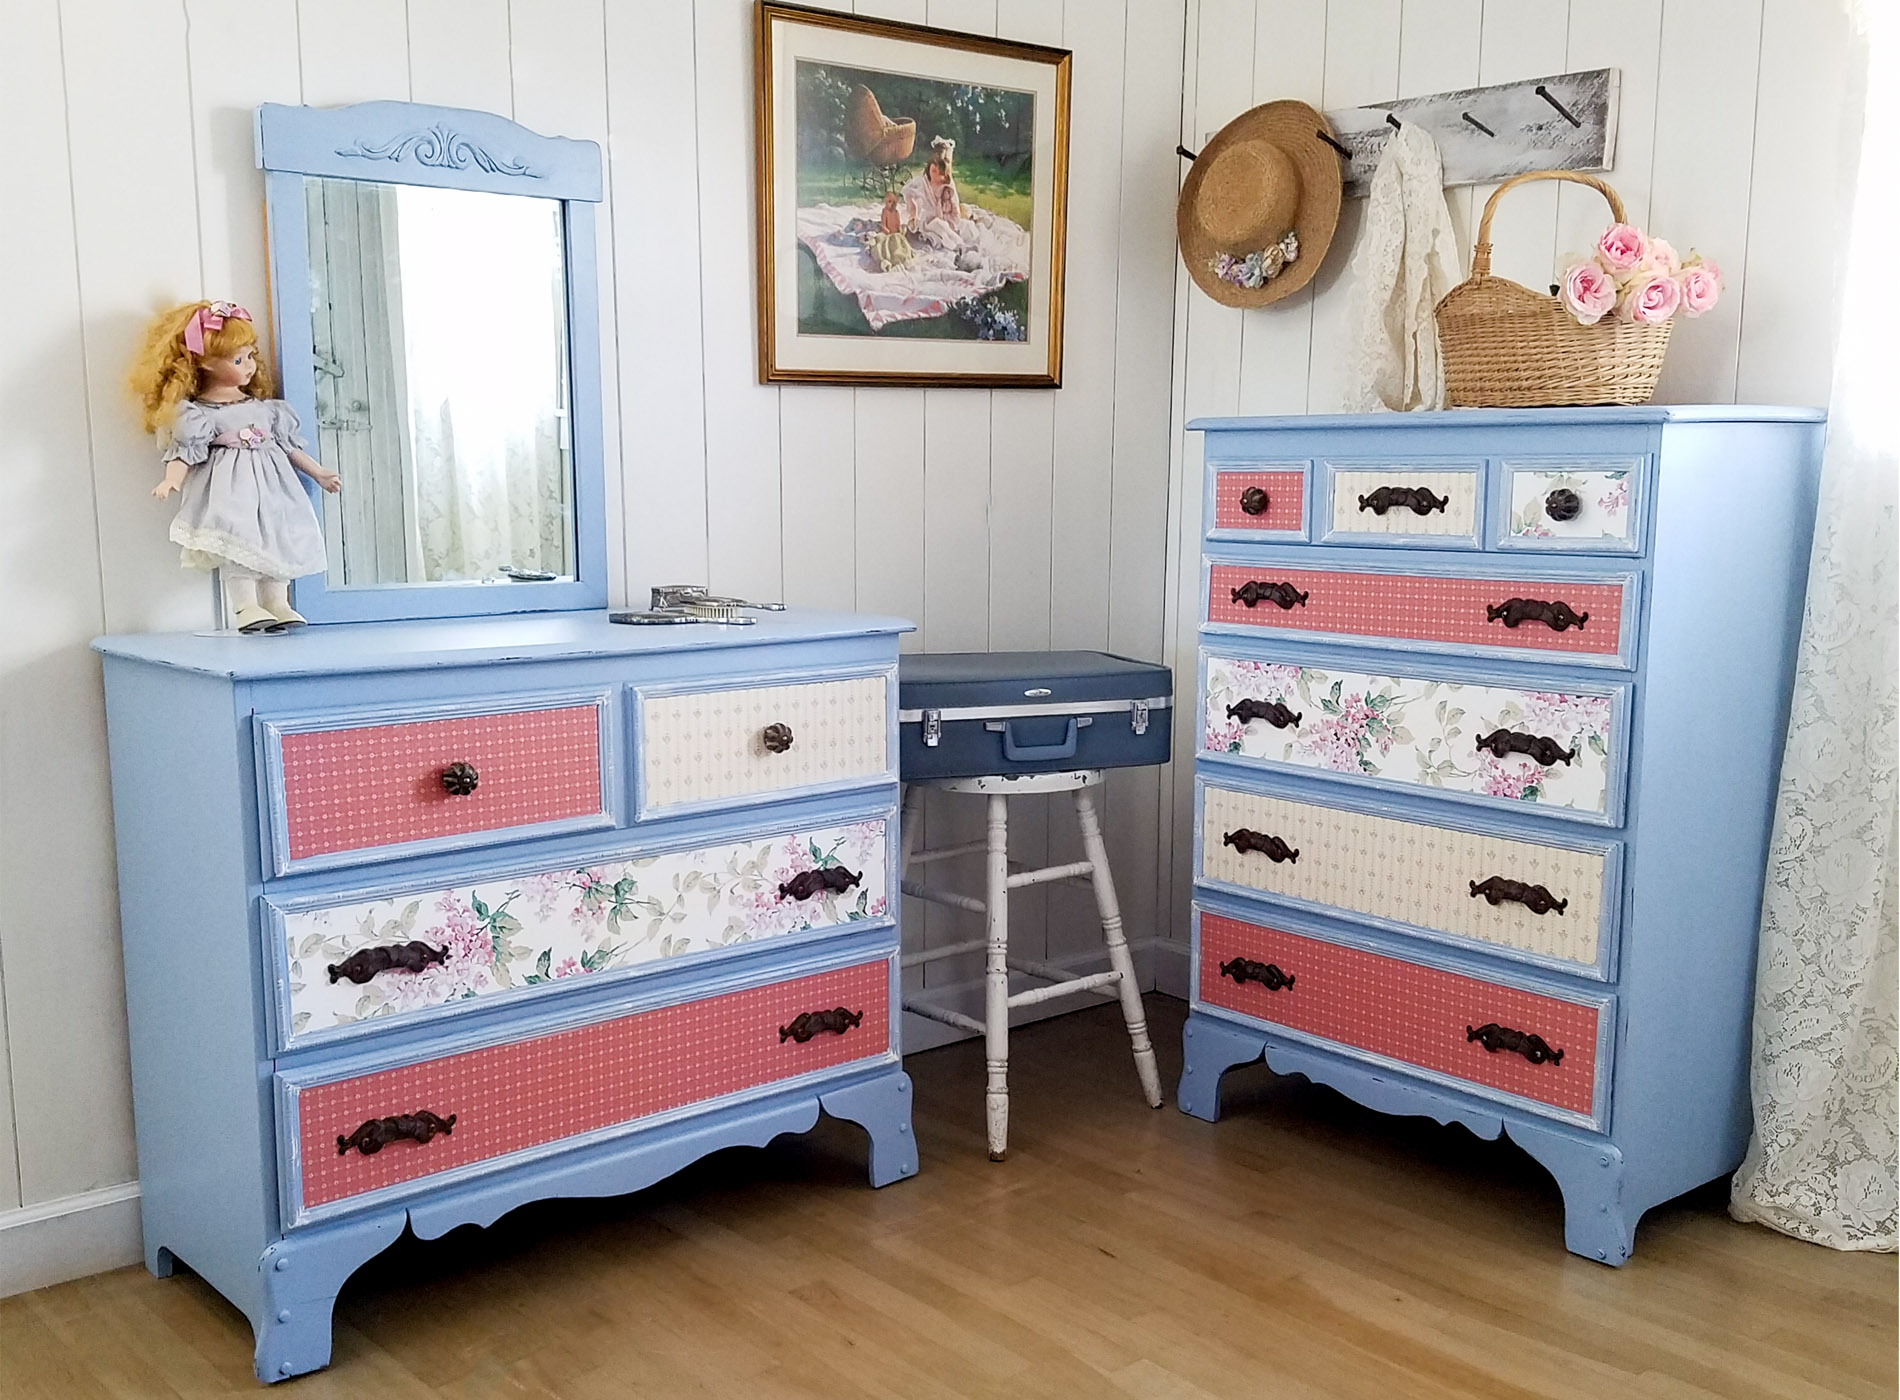 Featured Girls Bedroom Set Makeover by Prodigal Pieces | prodigalpieces.com